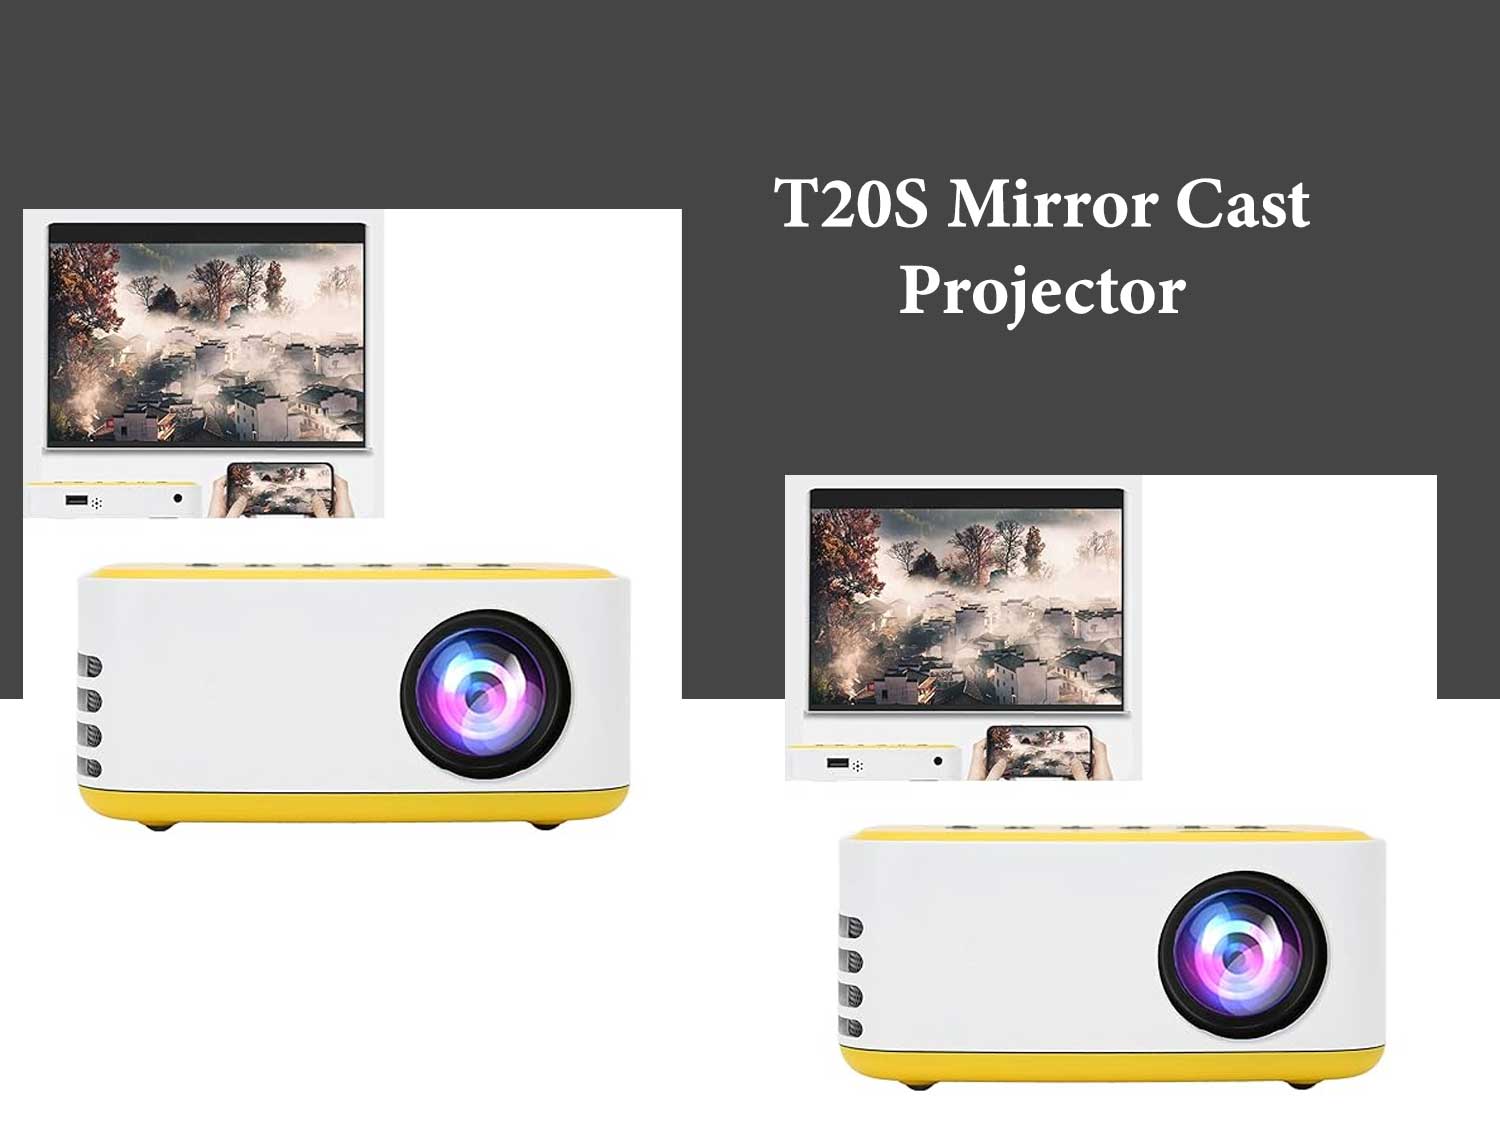 T20S Mirror Cast Projector